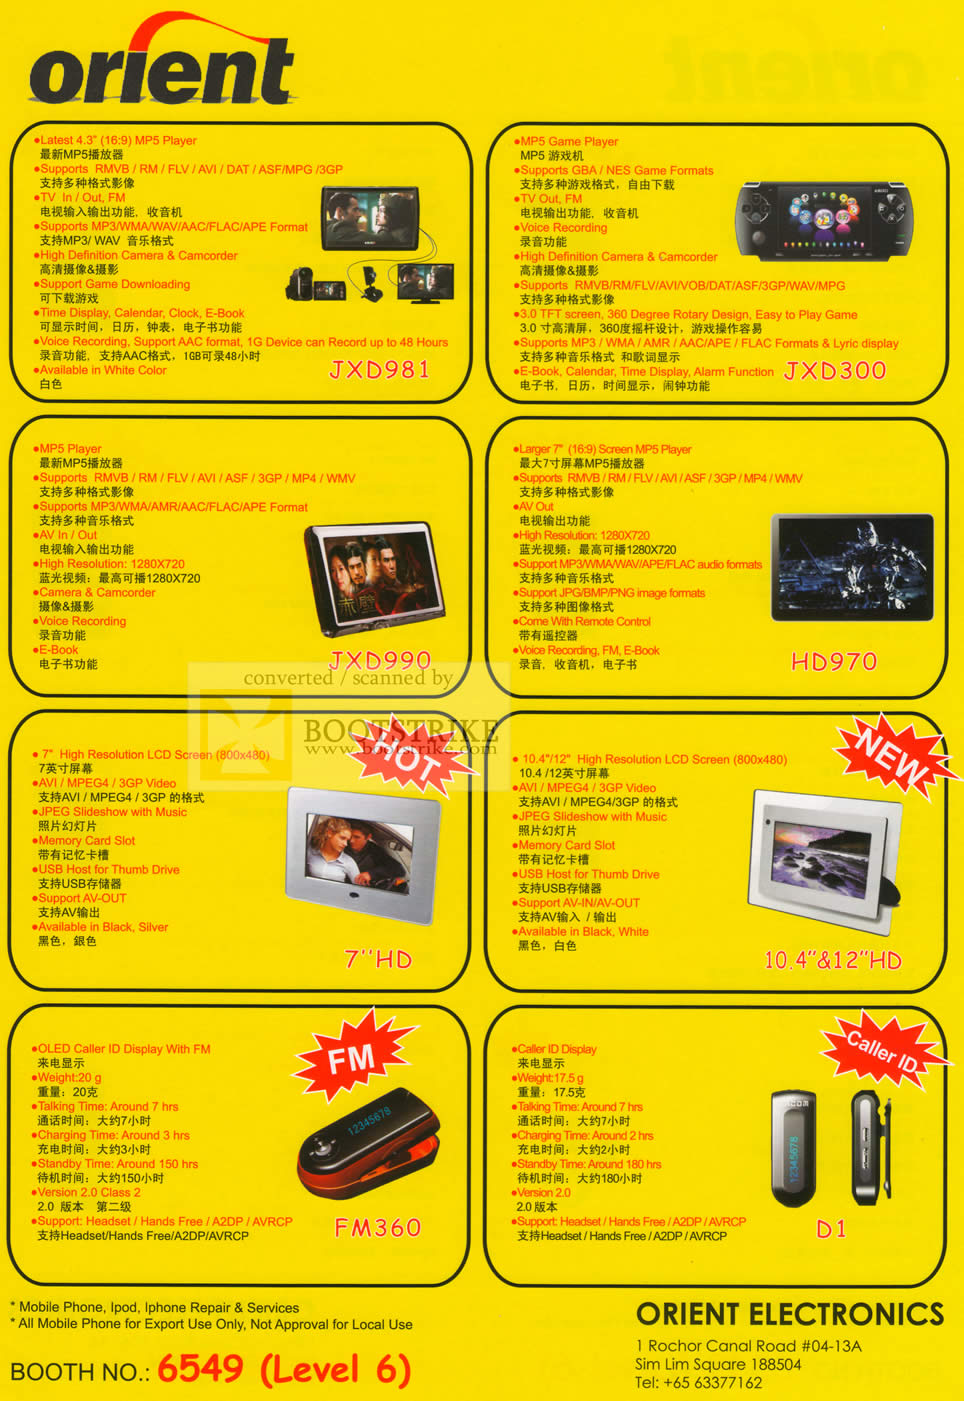 Sitex 2009 price list image brochure of Orient Mp5 Player Game Personal Video Player JXD 981 300 990 HD 970 Digital Photo Frame